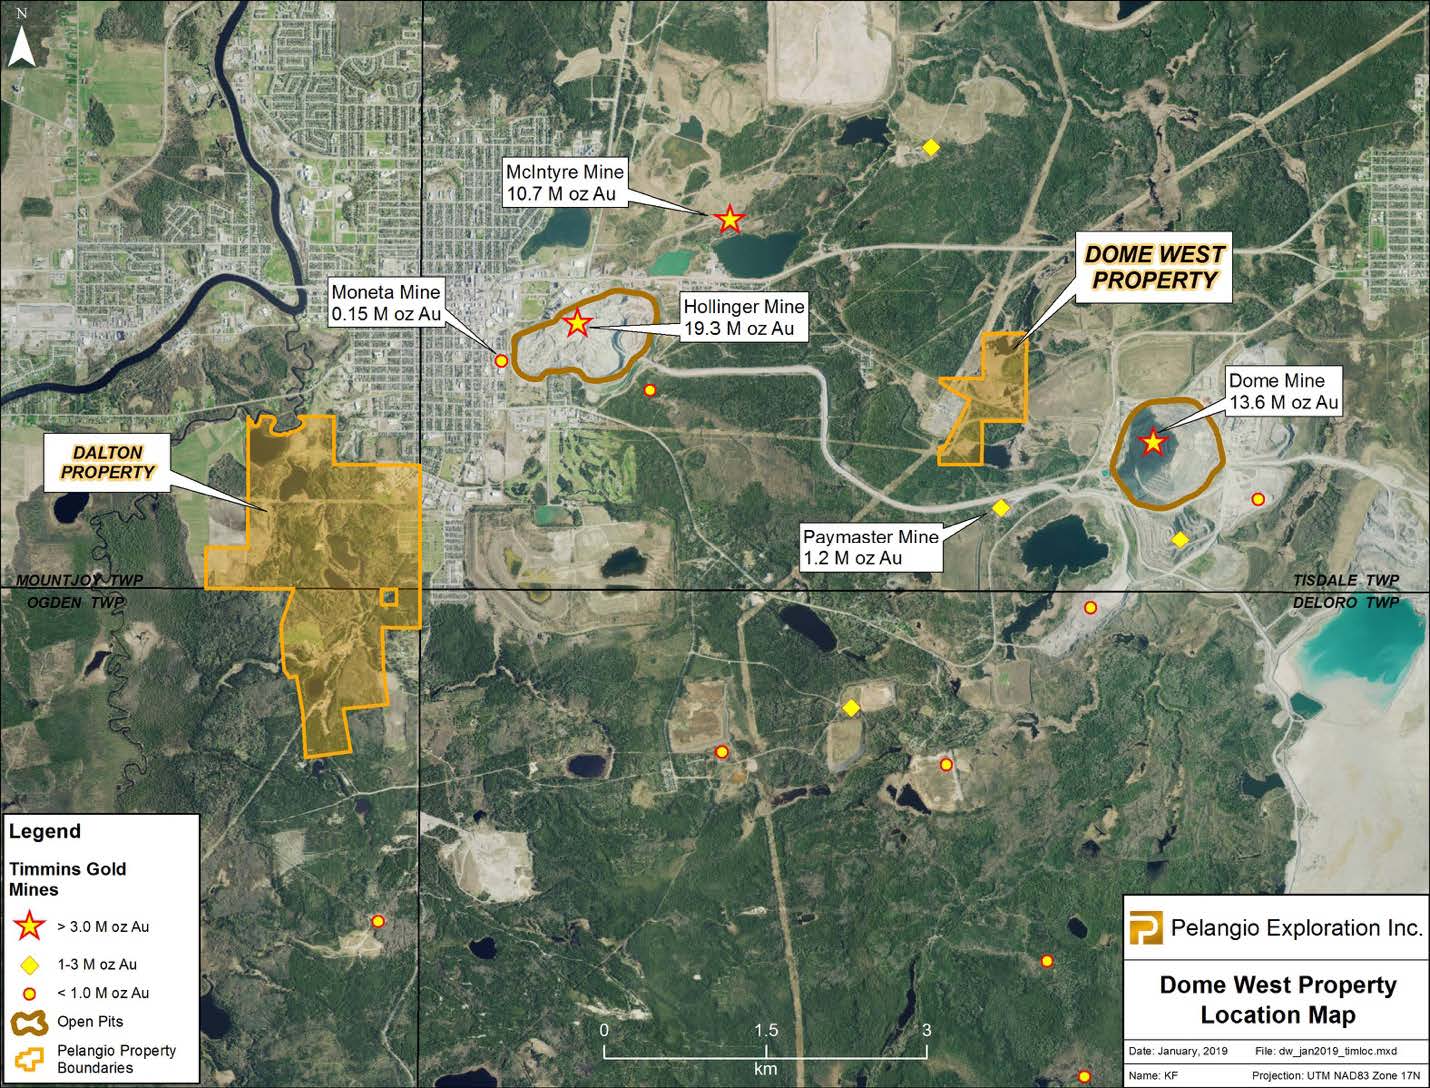 Pelangio Exploration Inc., Friday, January 17, 2020, Press release picture